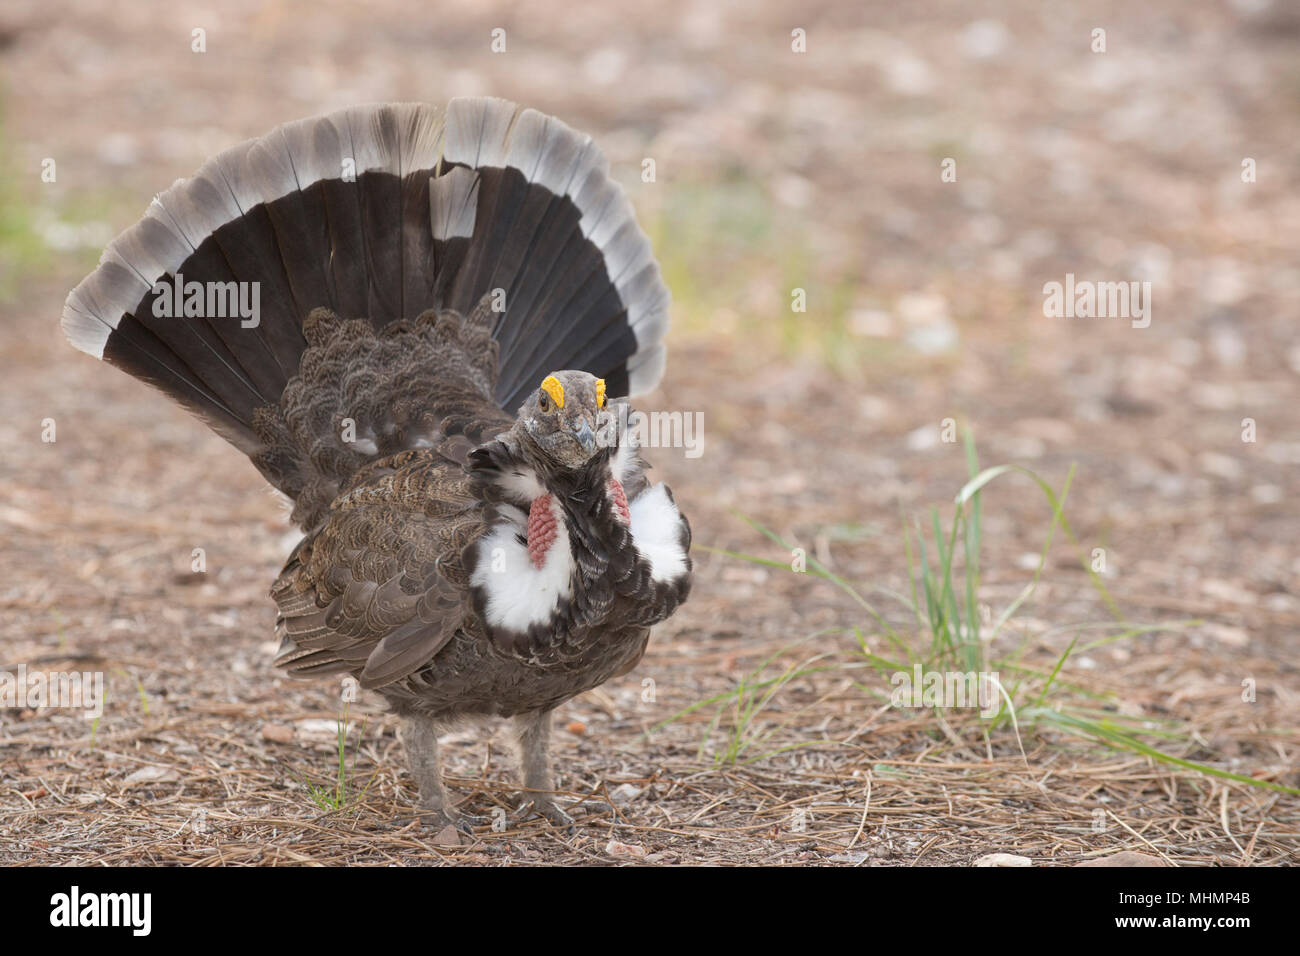 A wild turkey looking at you Stock Photo